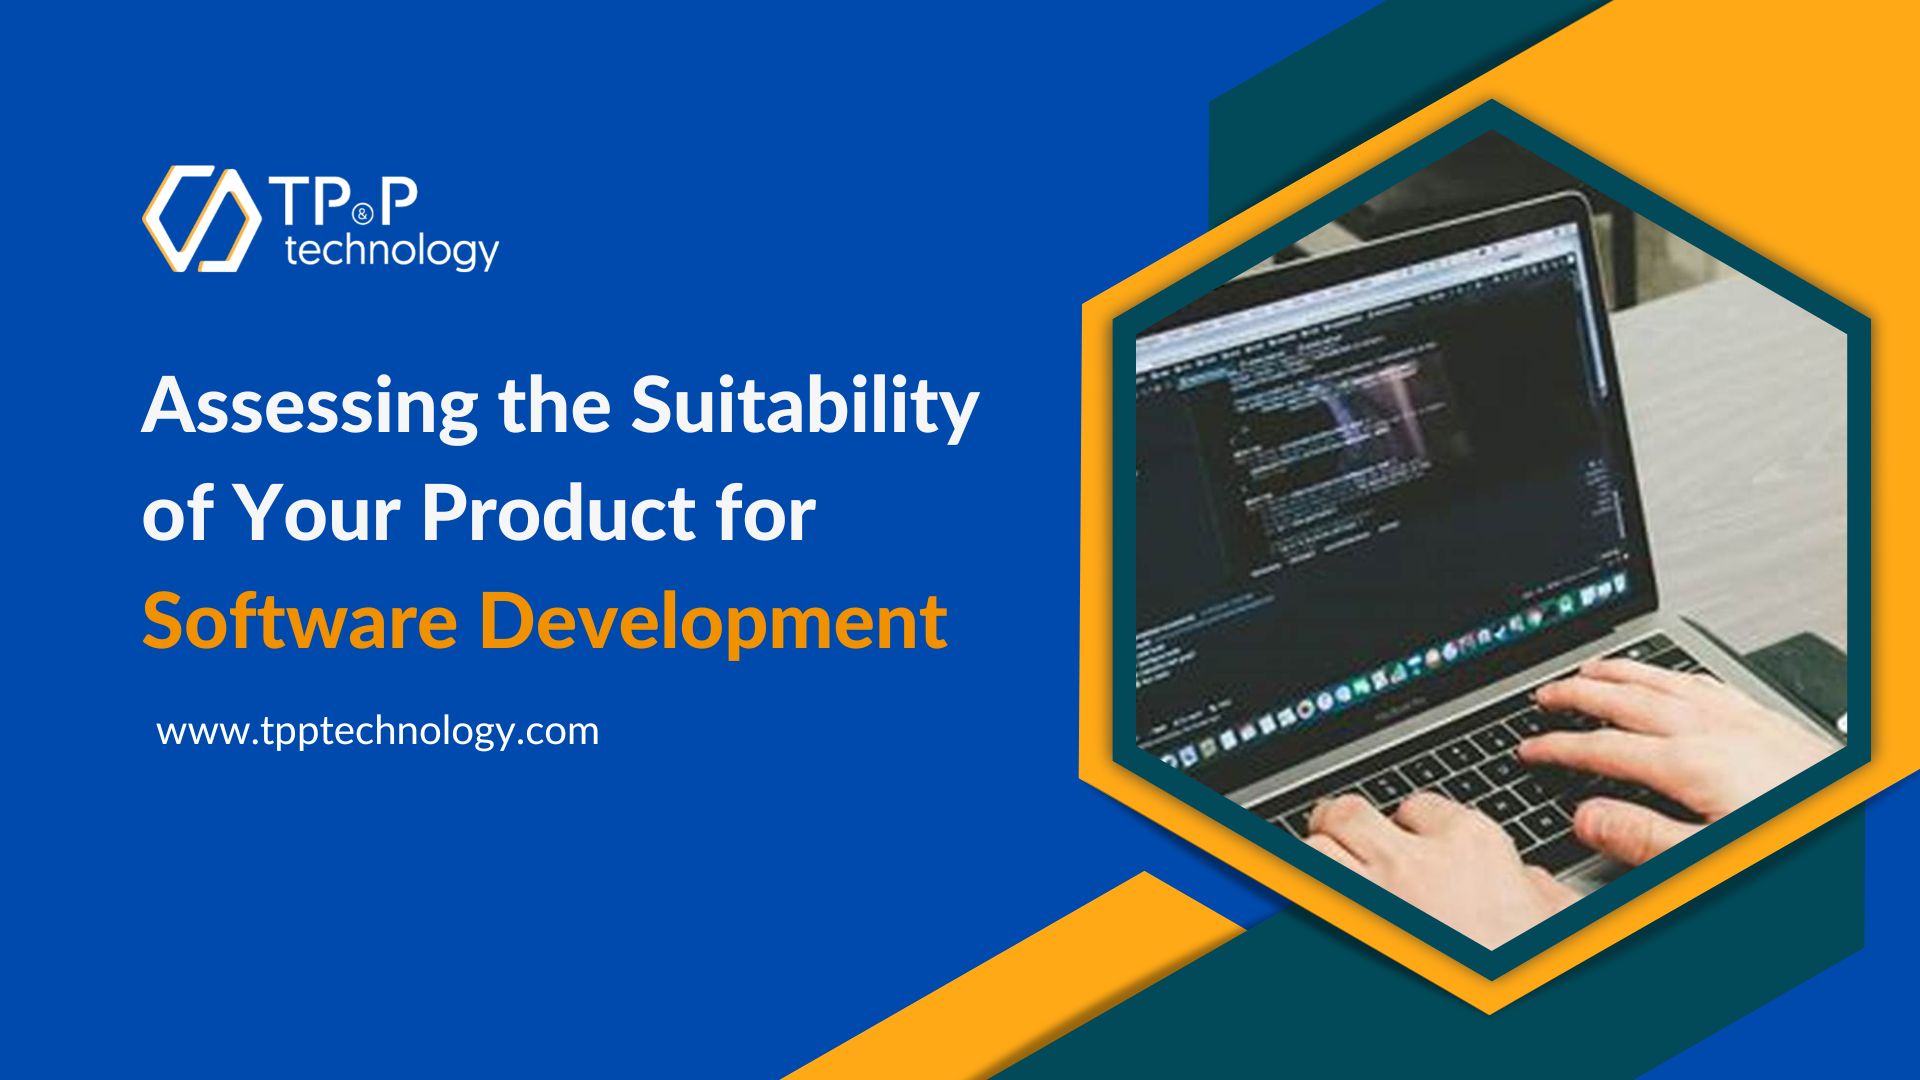 Assessing the Suitability of Your Product for Software Development